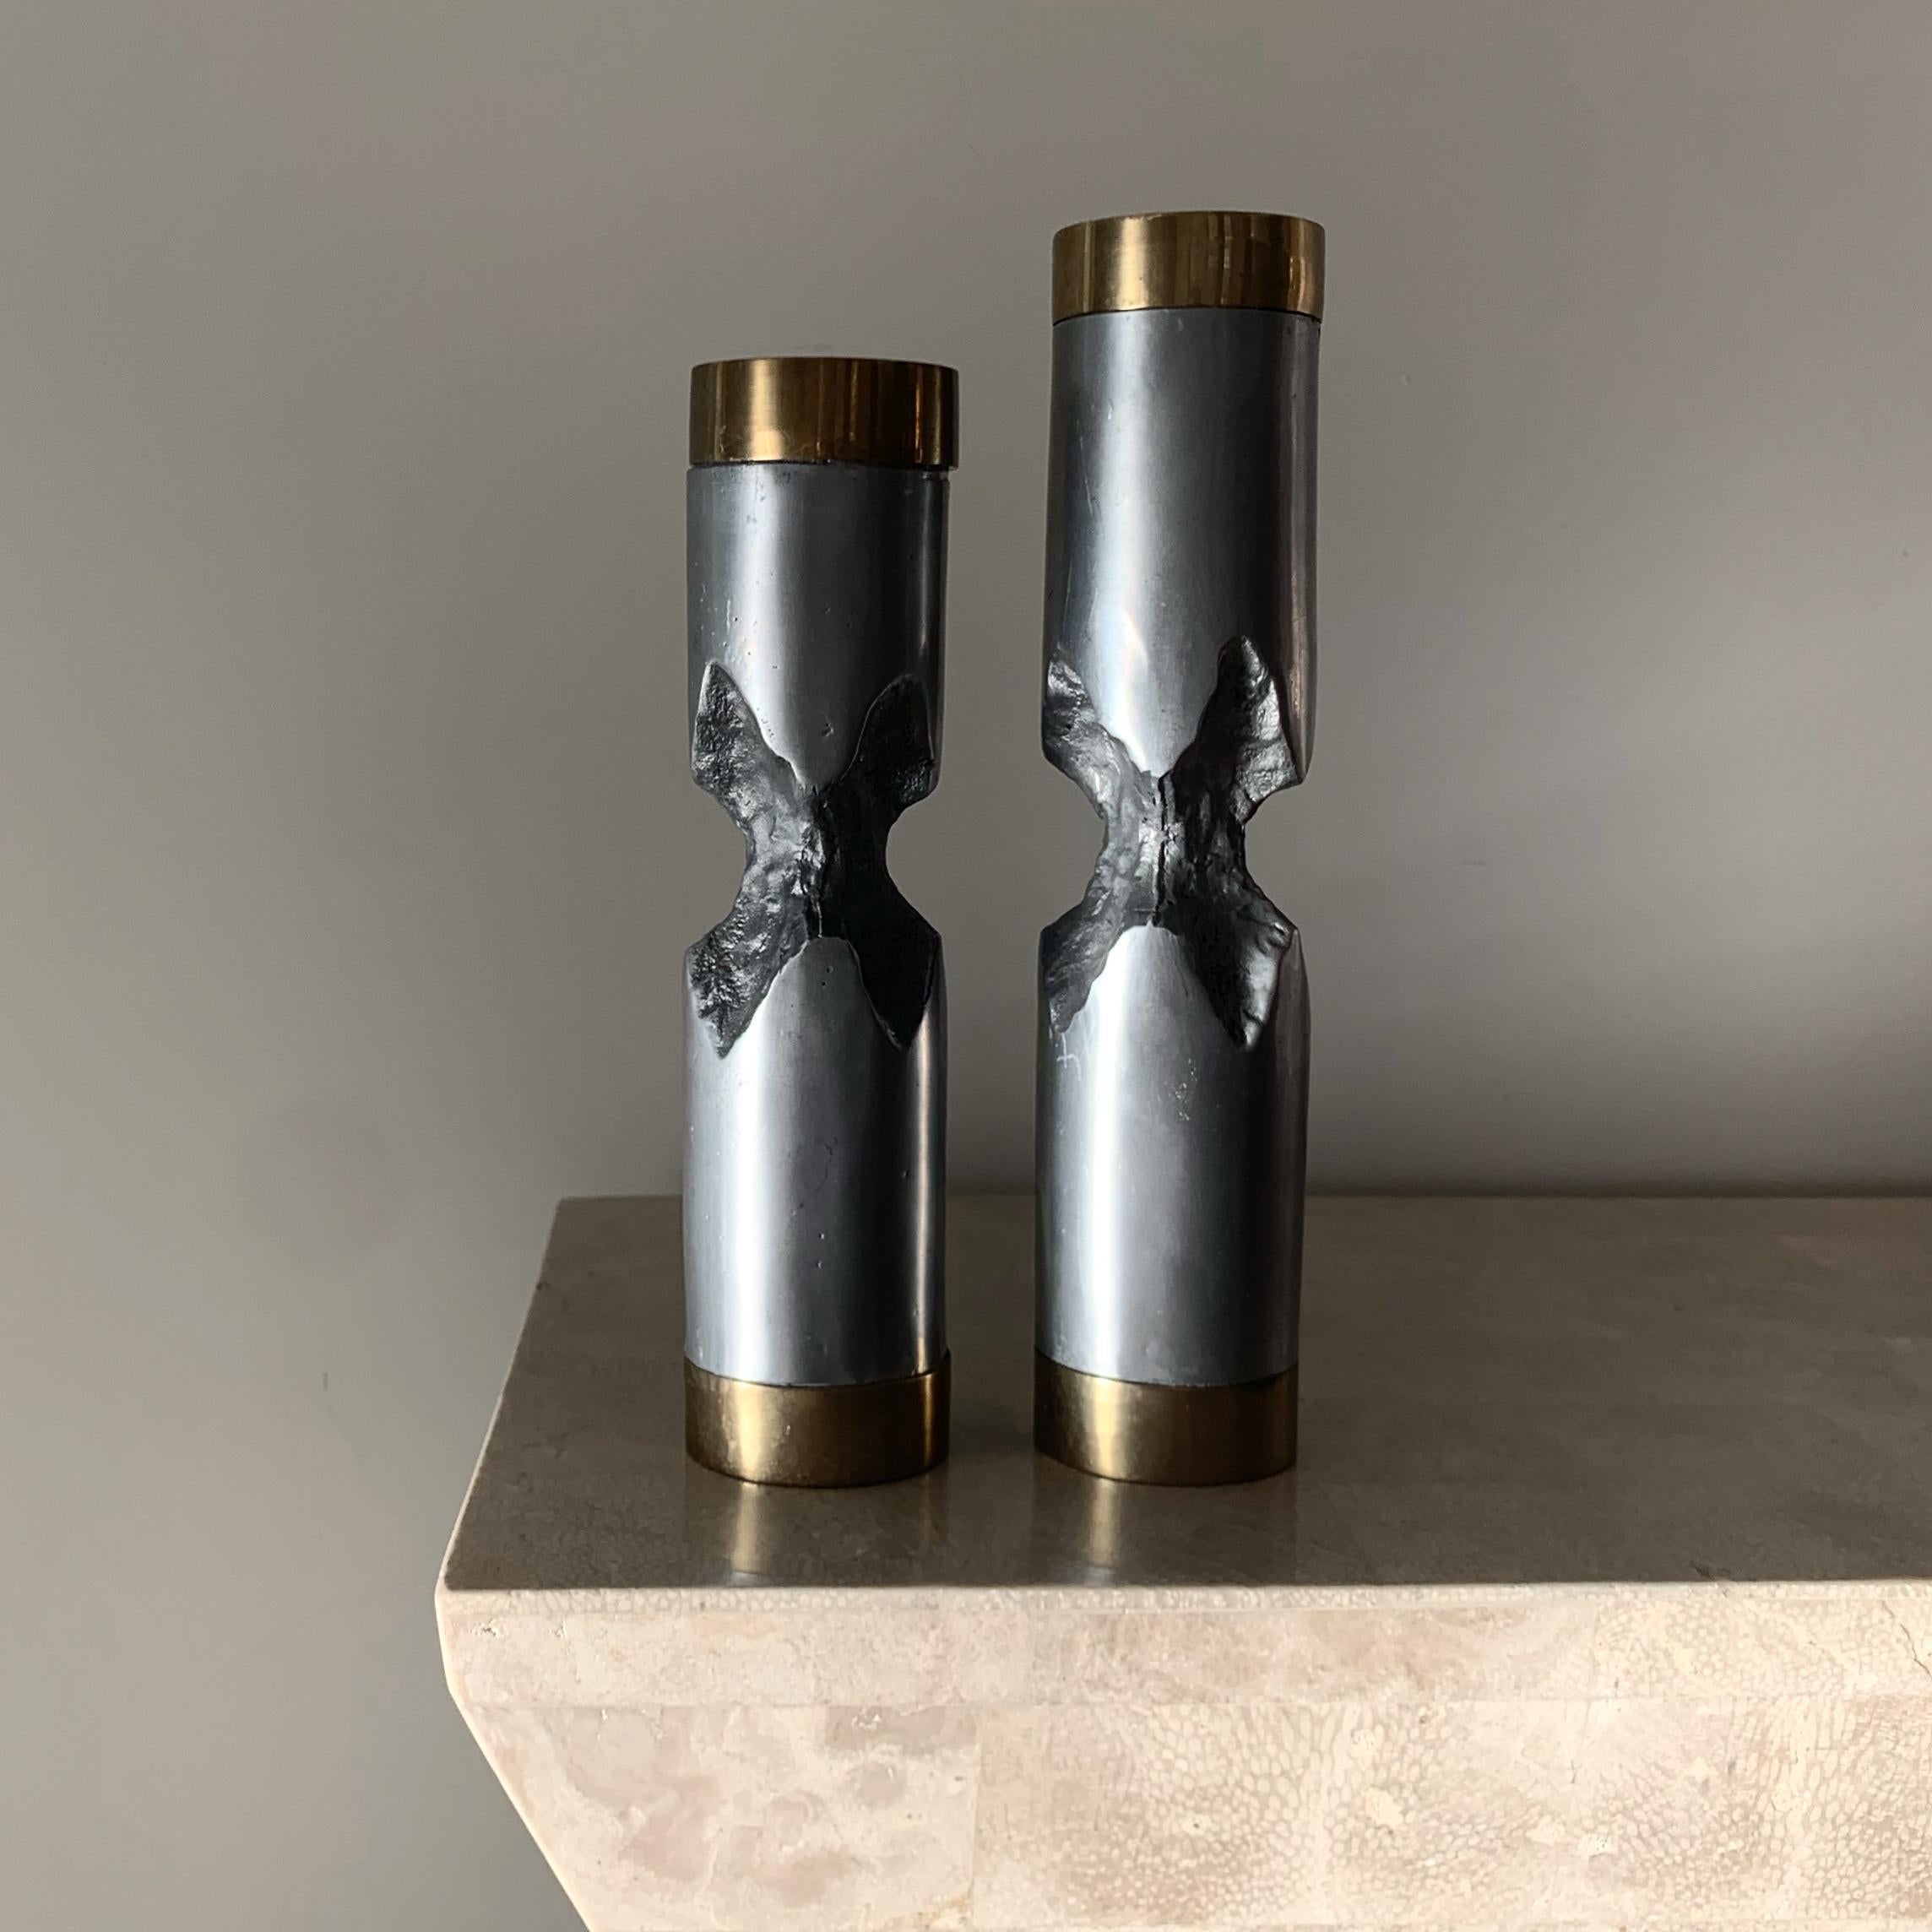 A stunning pair of Brutalist hand-crafted metallic and gilt candlesticks by David Marshall, 1970s. Aluminum and brass. Each hold a standard taper candle. Fabulous condition. Pick up in Los Angeles or delivery options available. 
Measures: Smaller: